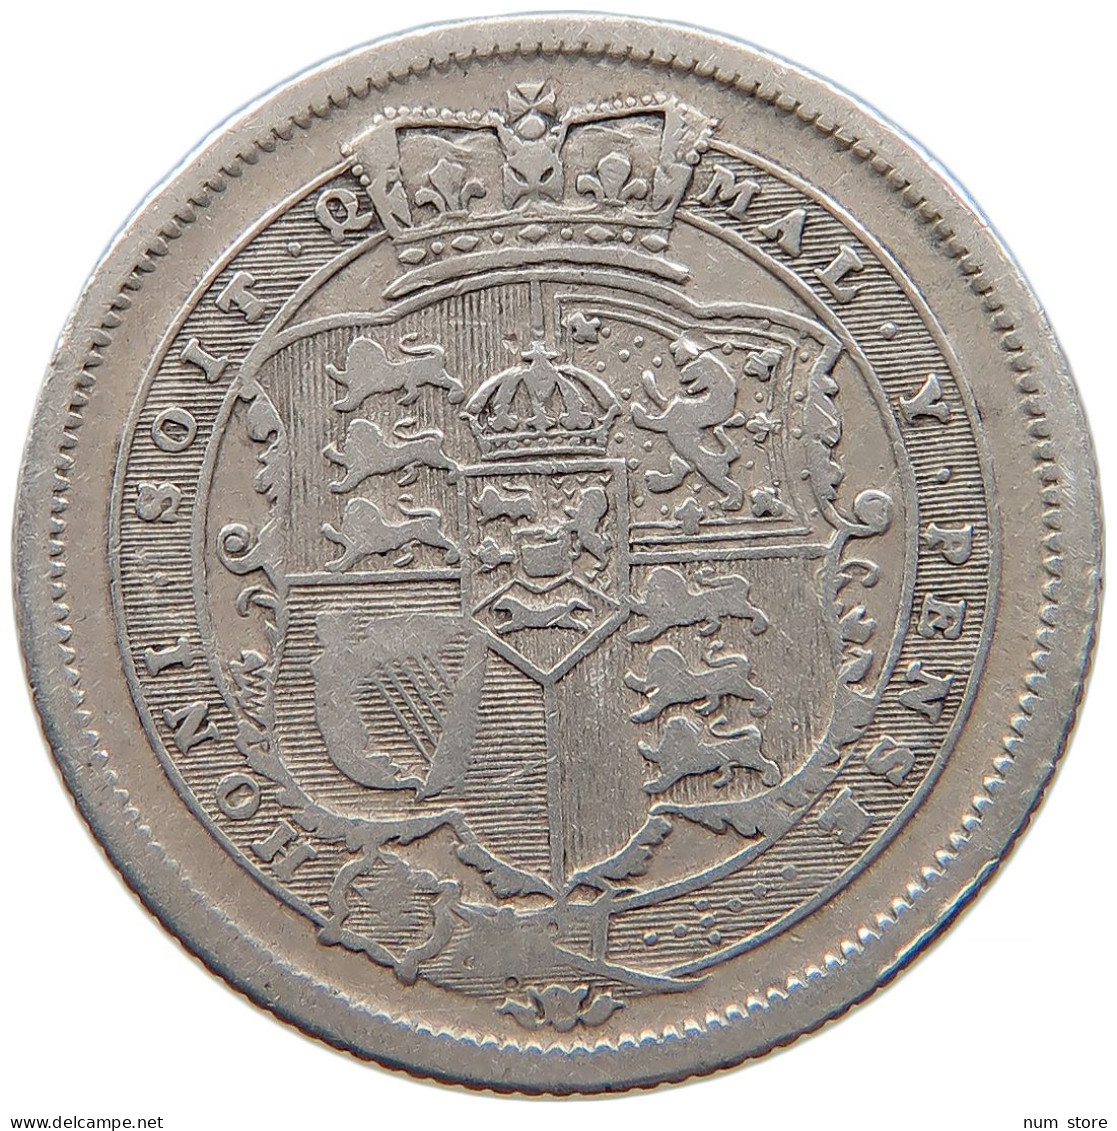 GREAT BRITAIN SHILLING 1816 Georg III. 1760-1820 #t022 0733 - I. 1 Shilling